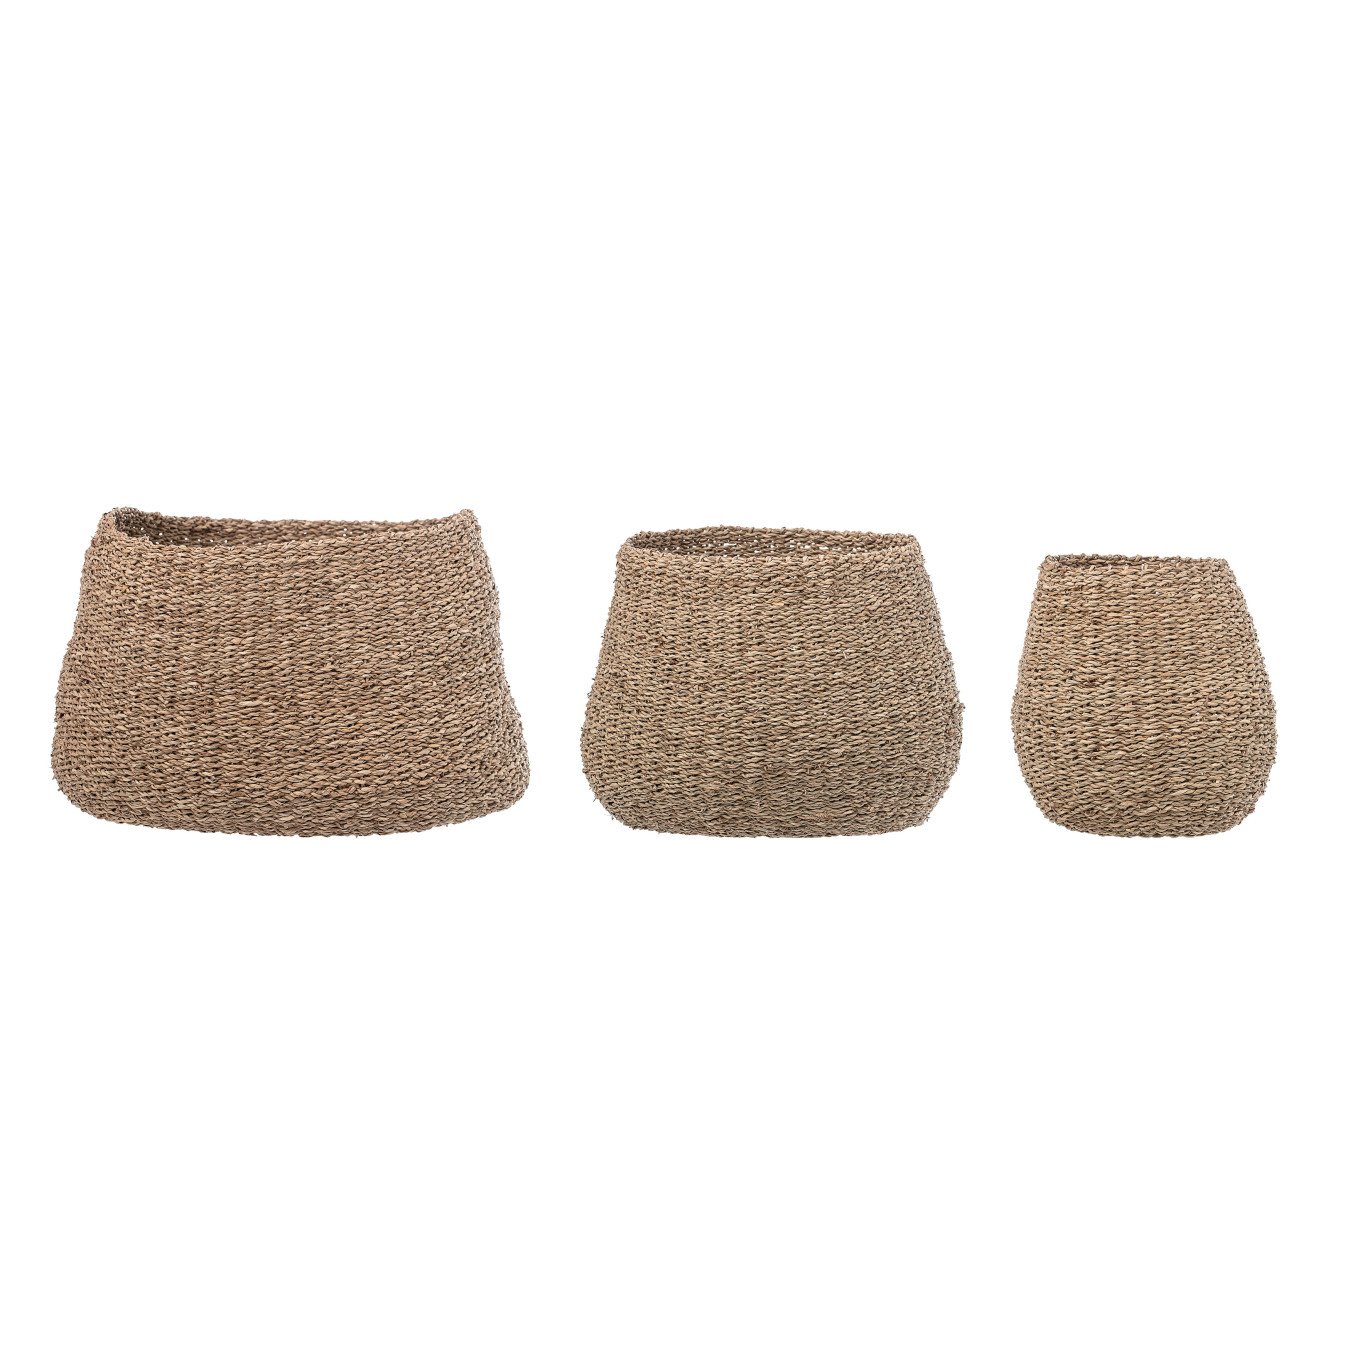 Brown Natural Seagrass Baskets (Set of 3 Sizes)